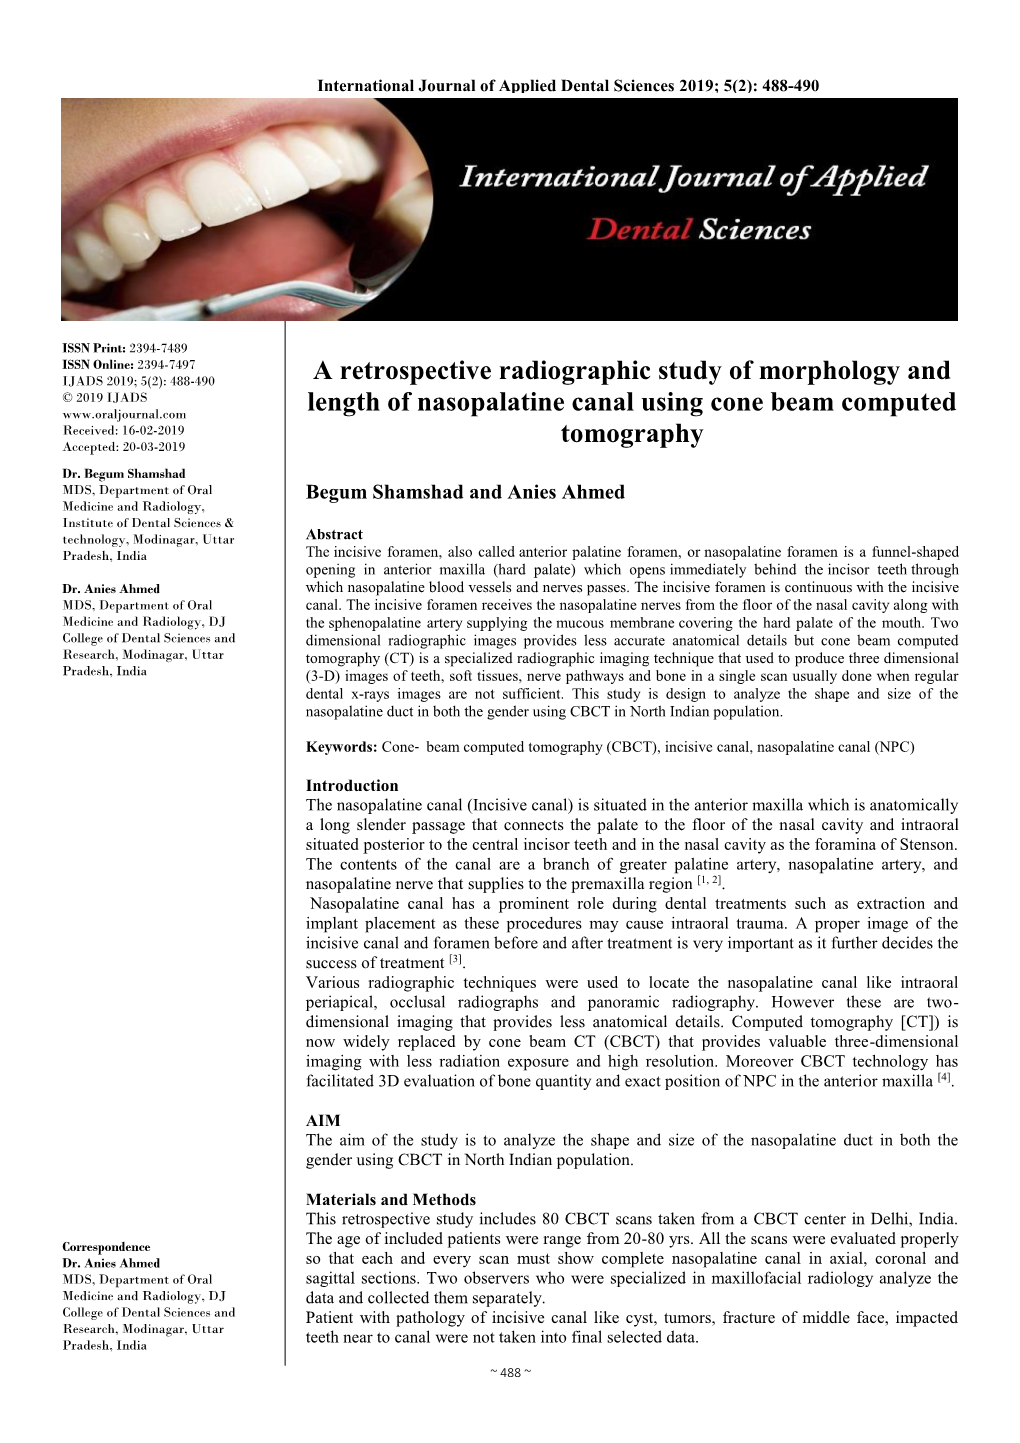 A Retrospective Radiographic Study of Morphology and Length Of